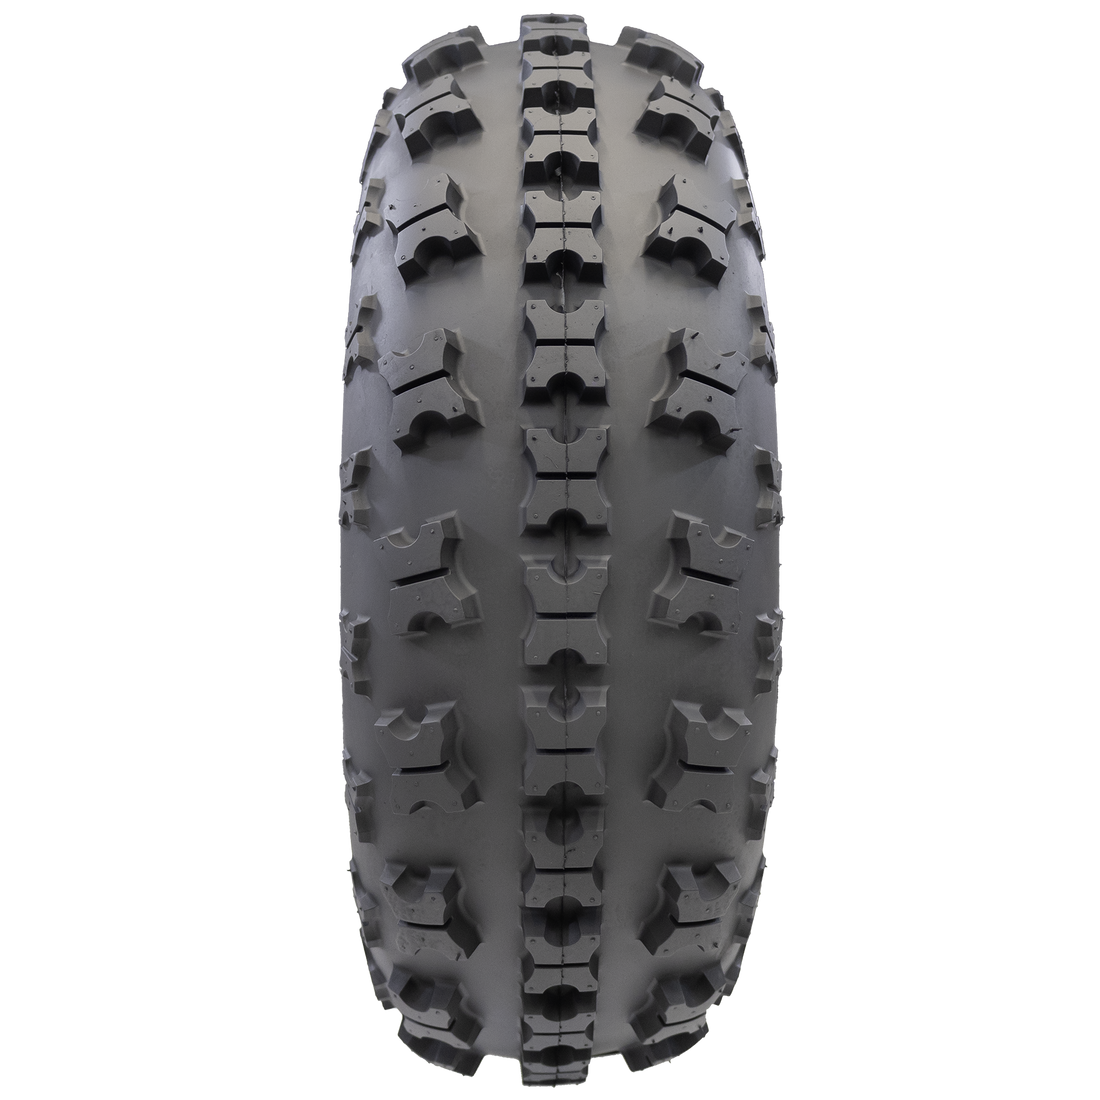 Full frontal view of the Battle Born tire, providing a clear look at the directional grooved X-knob tread pattern. This lightweight yet dependable design ensures optimal drive and braking power, especially in the heat of competition.